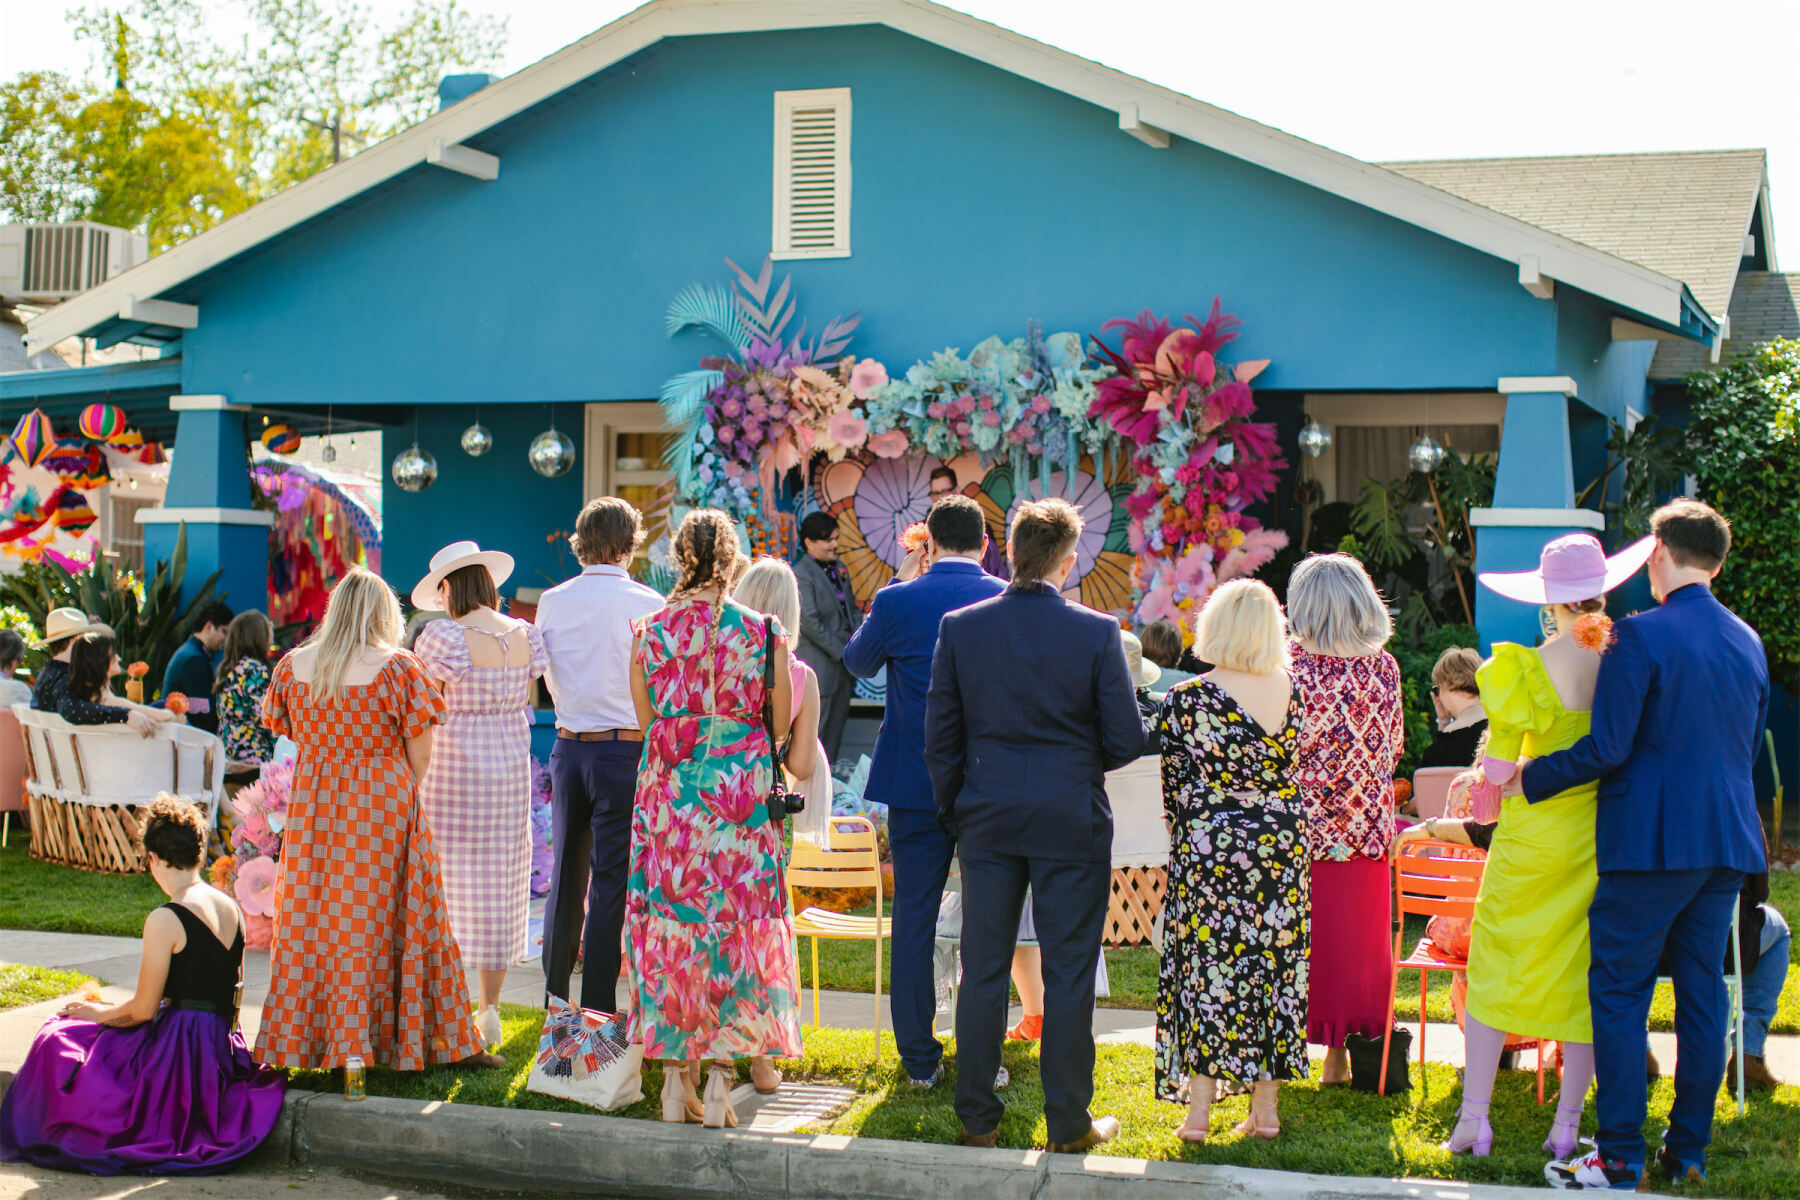 Guests enjoy a vibrant outdoor wedding at a couple's teal green home in Fresno.